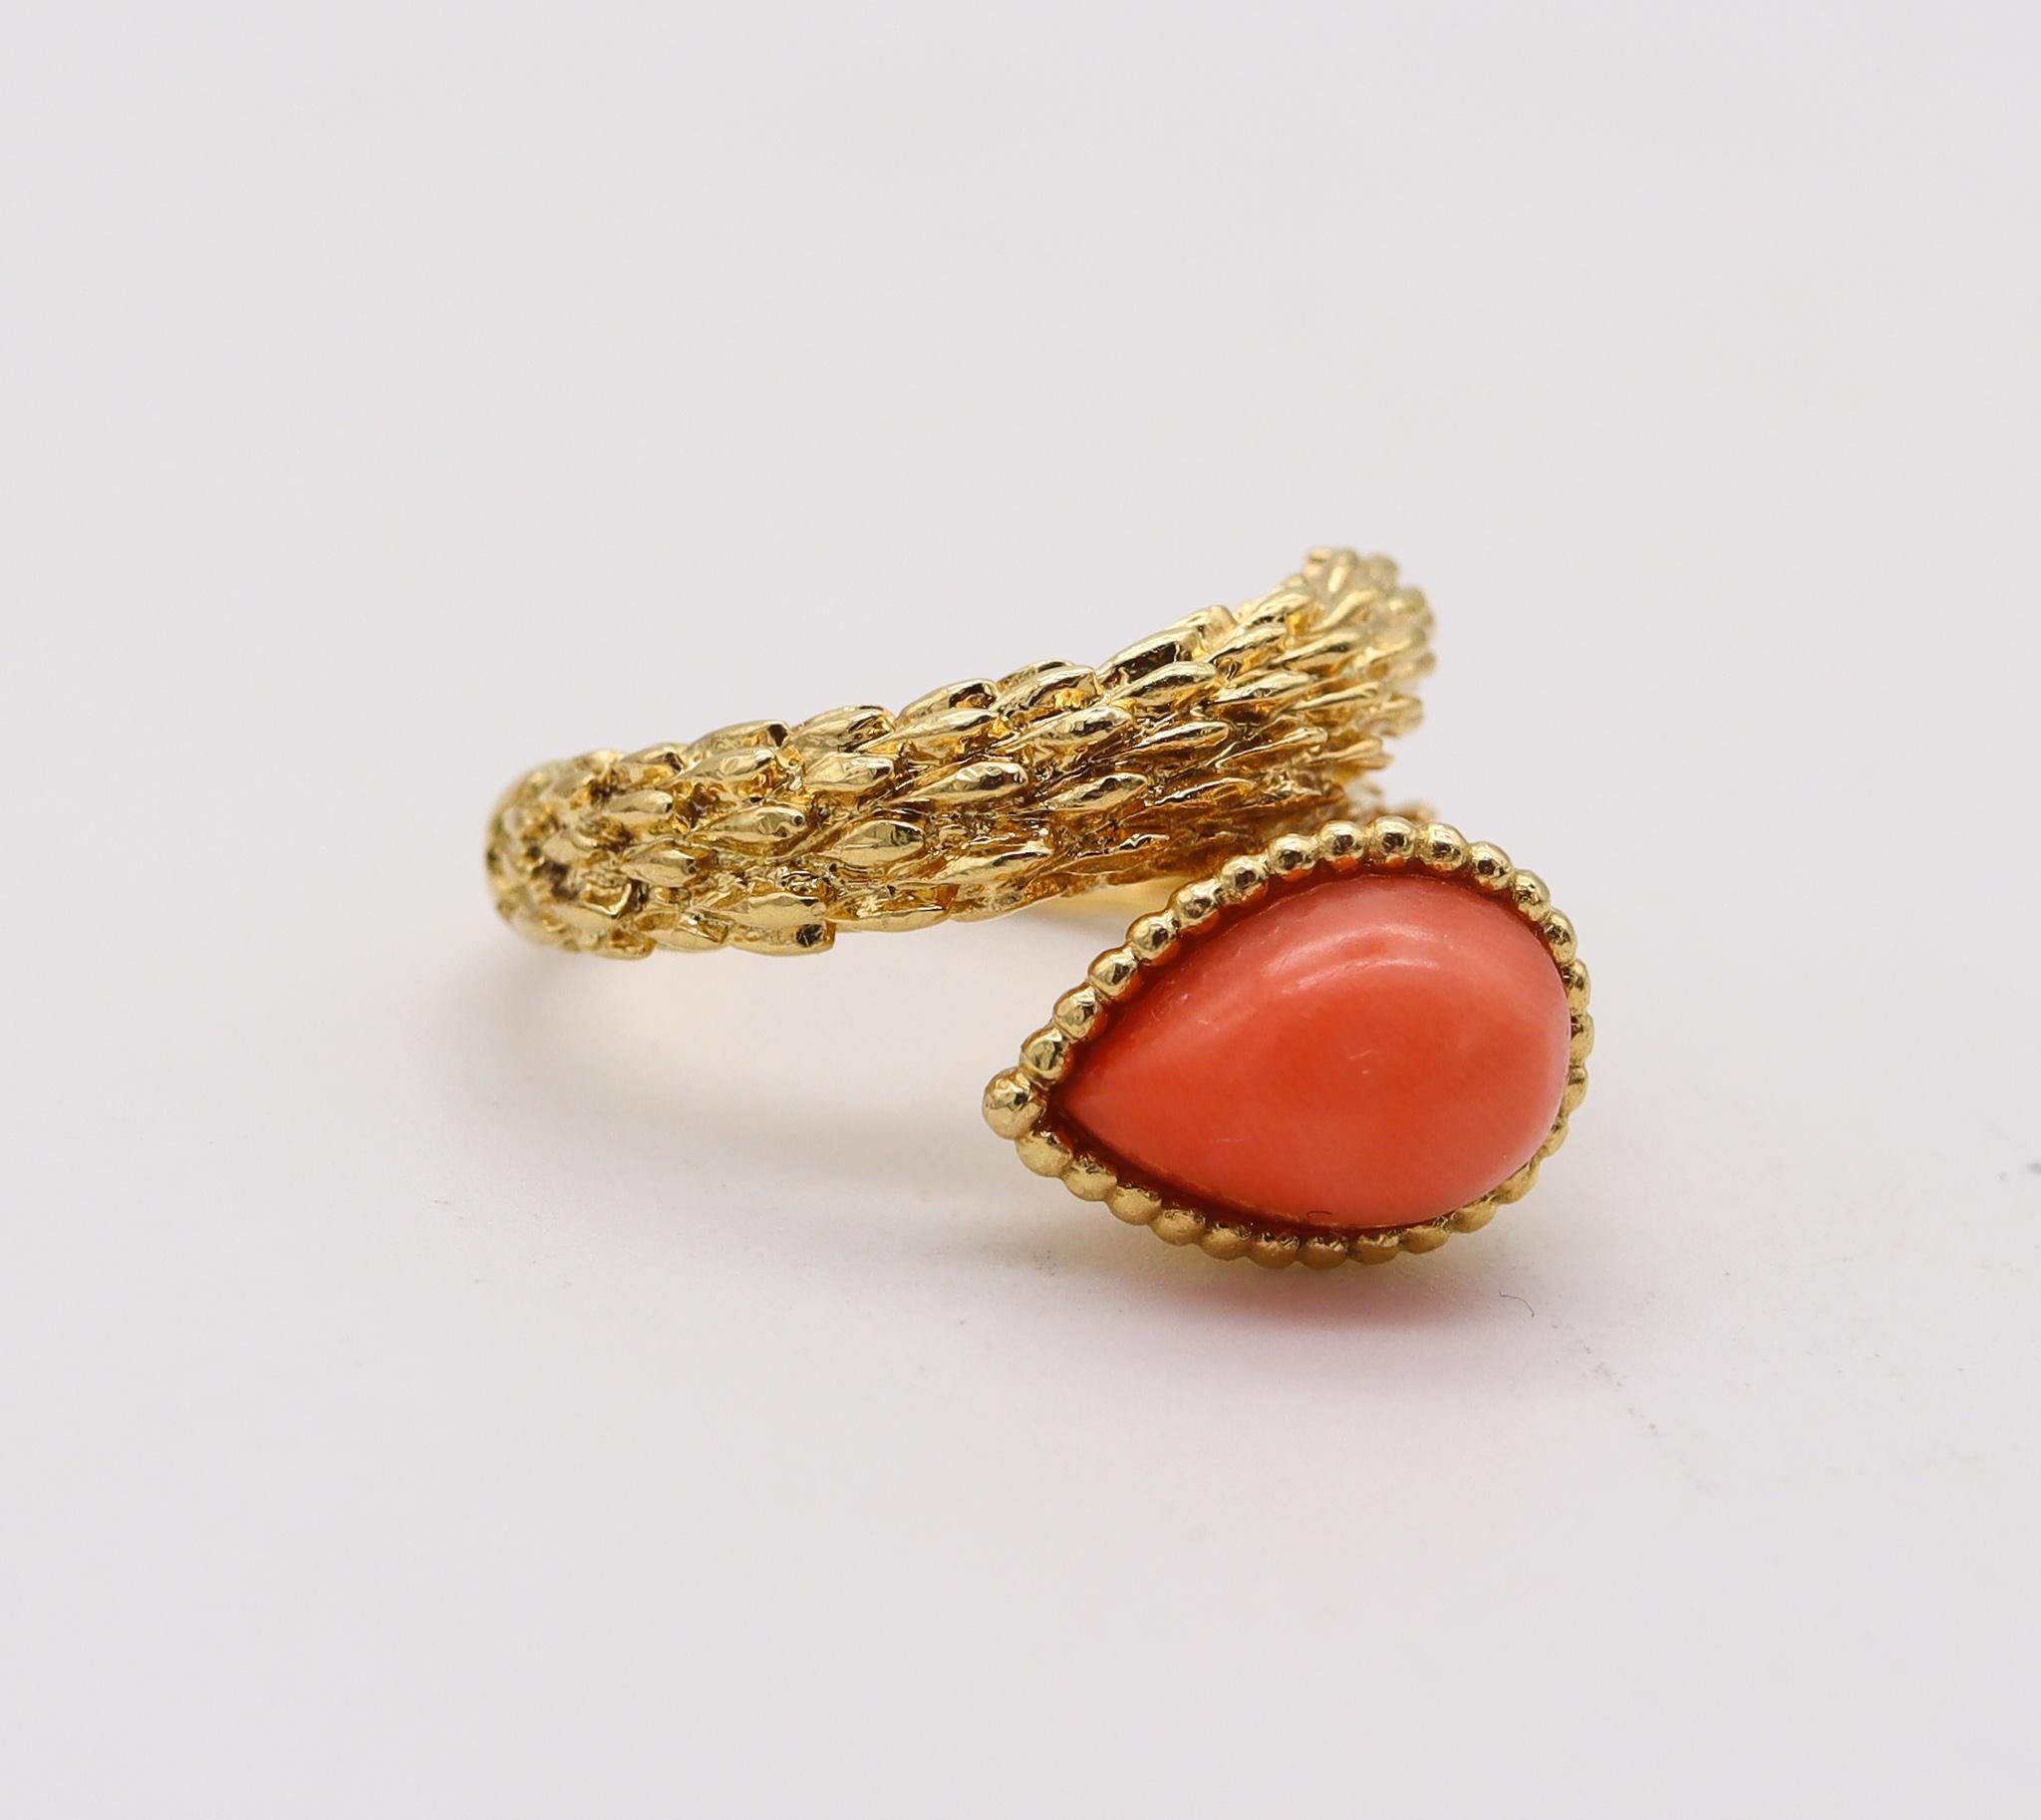 Modernist Boucheron Paris 1970 Serpent Boheme Textured Ring In 18Kt Yellow Gold With Coral